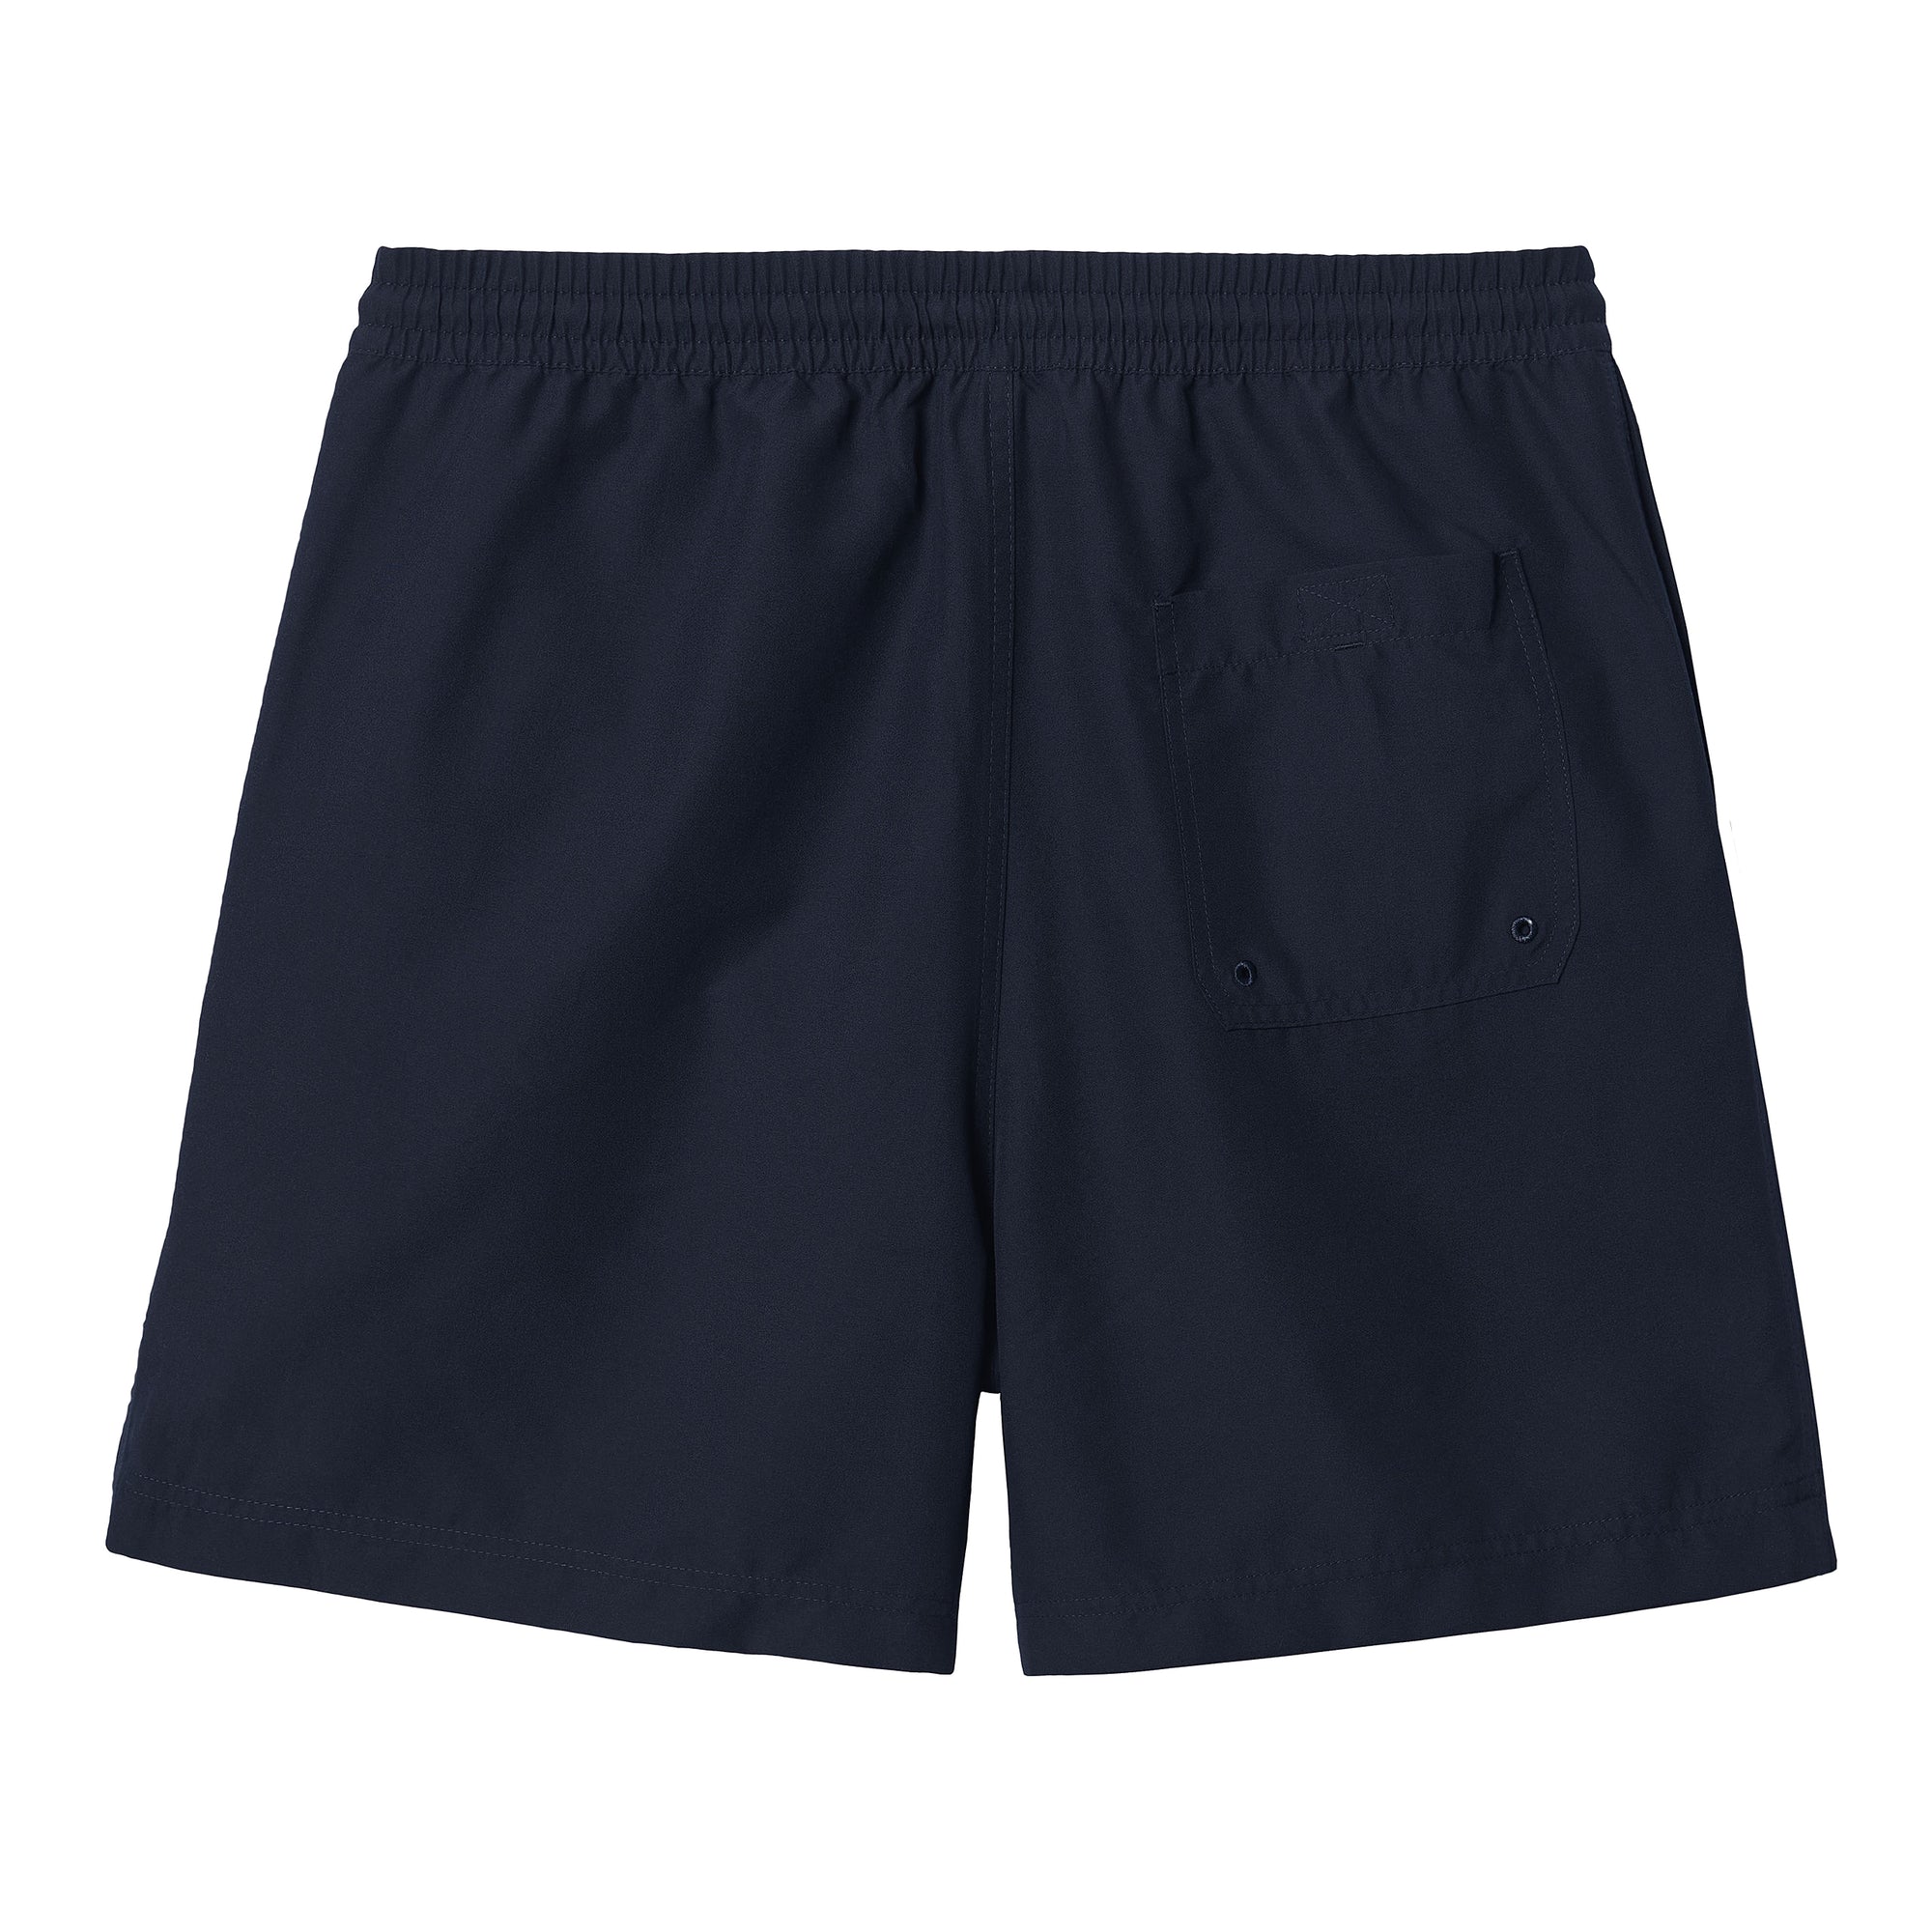 Chase Swim Trunk DARK NAVY/GOLD
The Chase Swim Trunks are constructed from lightweight fabric with water-repellent and fast-drying qualities. Lined with mesh, they also feature an embroidered Carhartt WIP ‘C’ logo on the left leg, two side seam pockets, an adjustable waistband, and a key holder in the back pocket.

I026235_00F_XX
100% polyester
Regular fit
Water-repellent
Mesh lining
Side seam pockets
Back pocket with key holder
 CARHARTT WIP